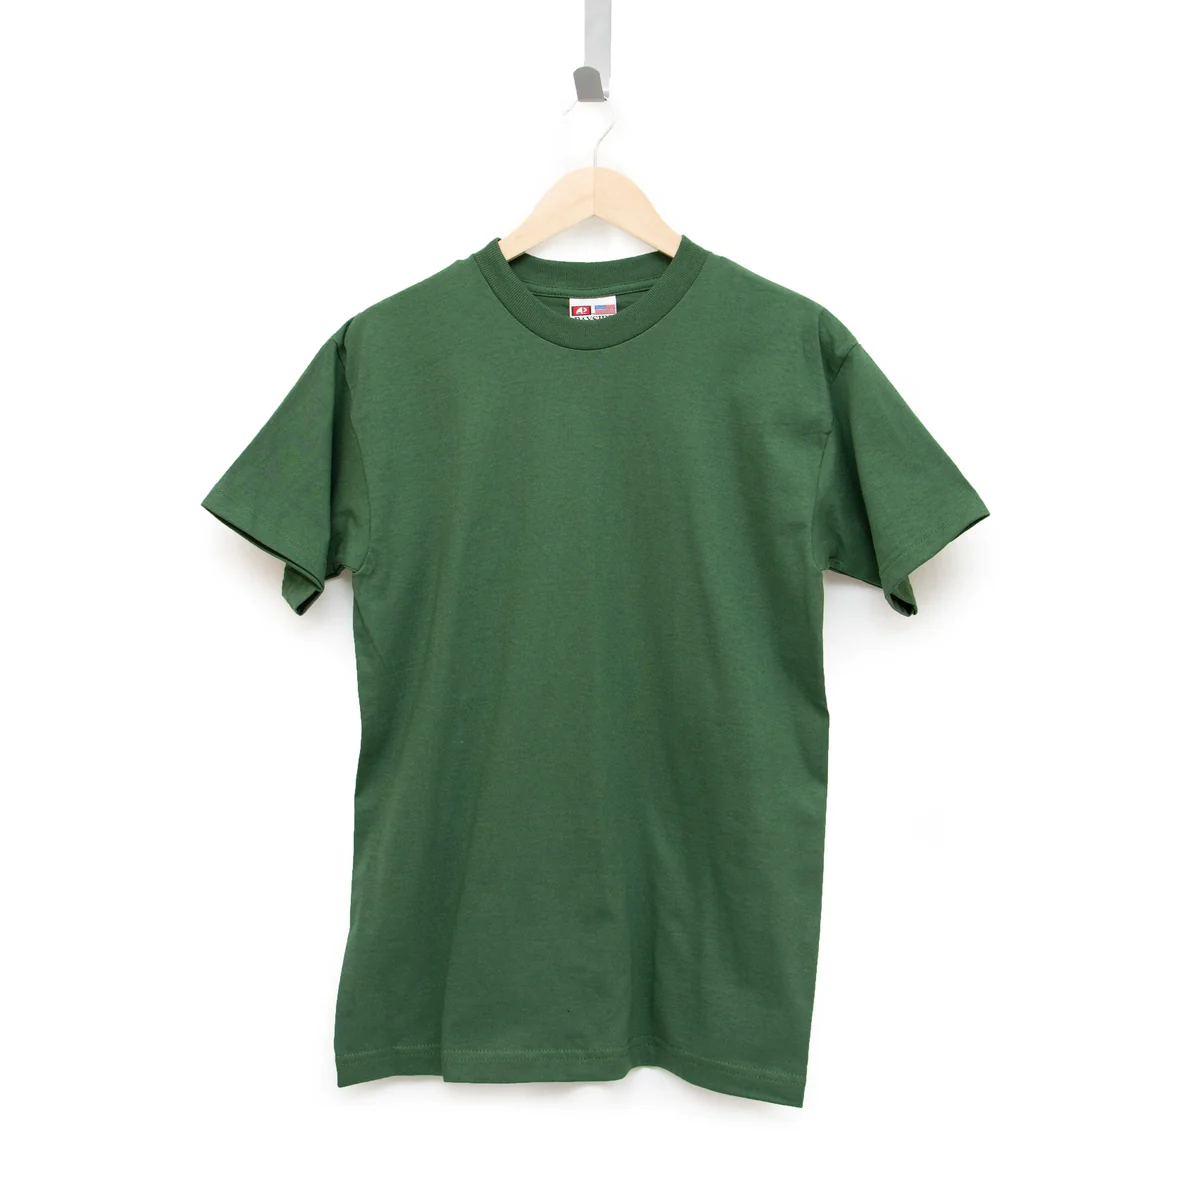 All American Clothing Co. STANDARD COLORED HEAVYWEIGHT 100% COTTON T-SHIRT